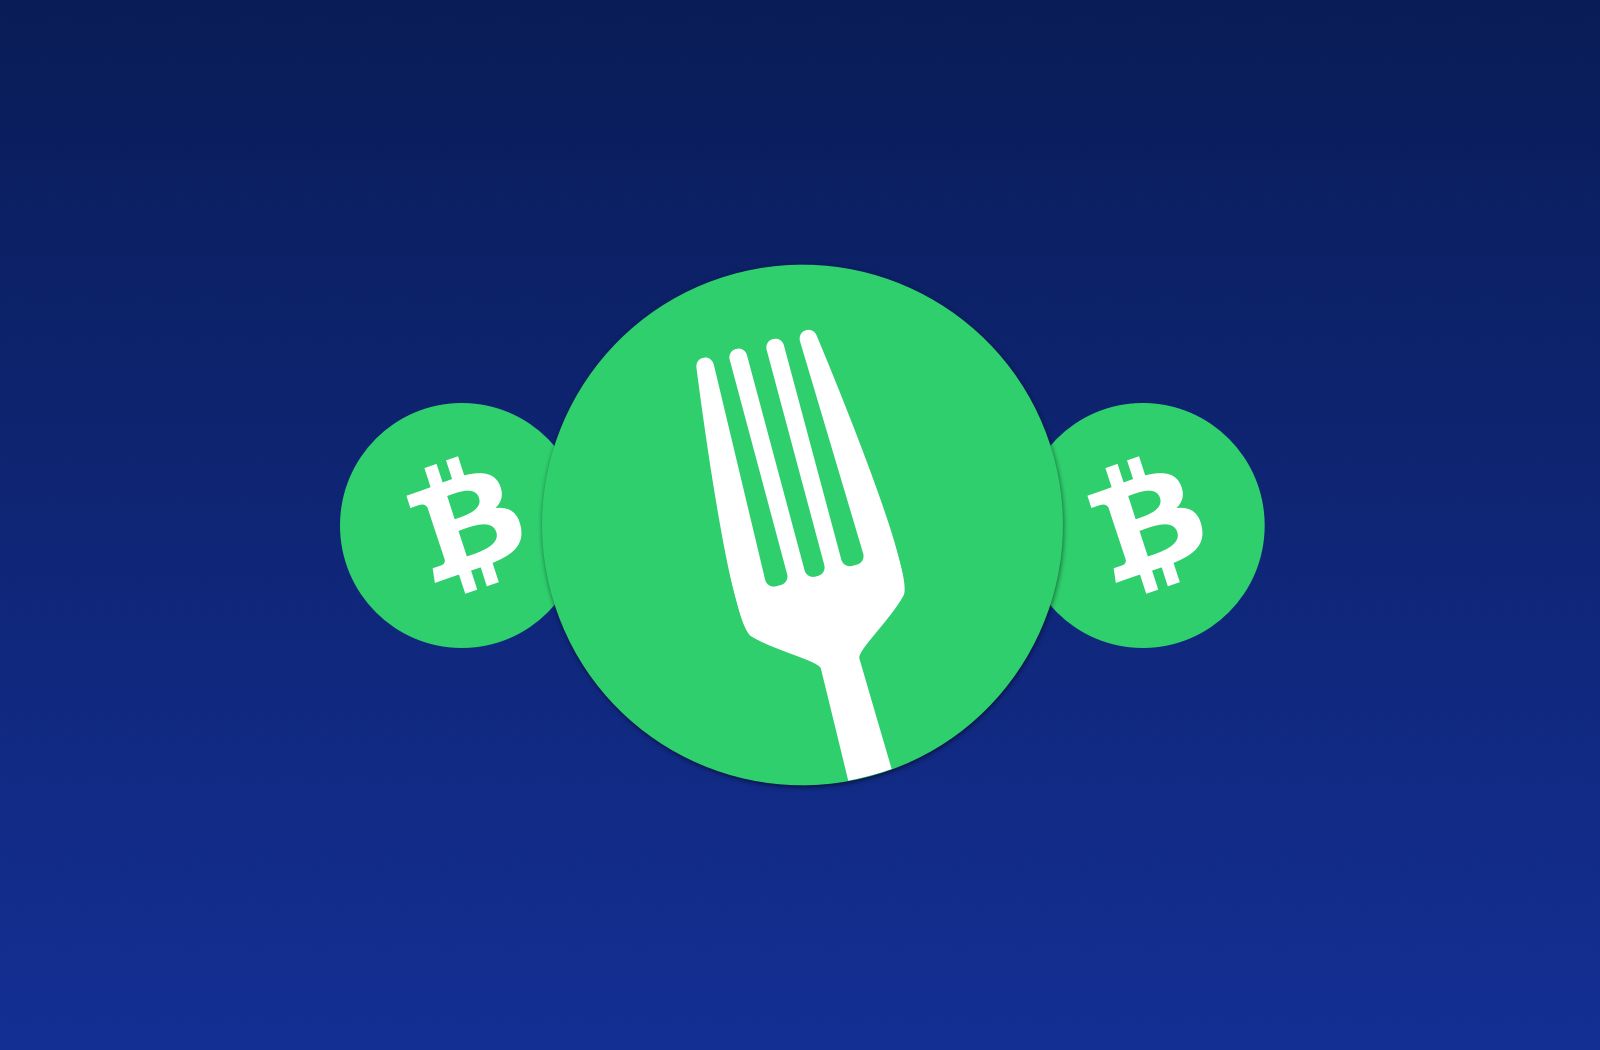 What the Nov 15th 2020 BCH fork means.